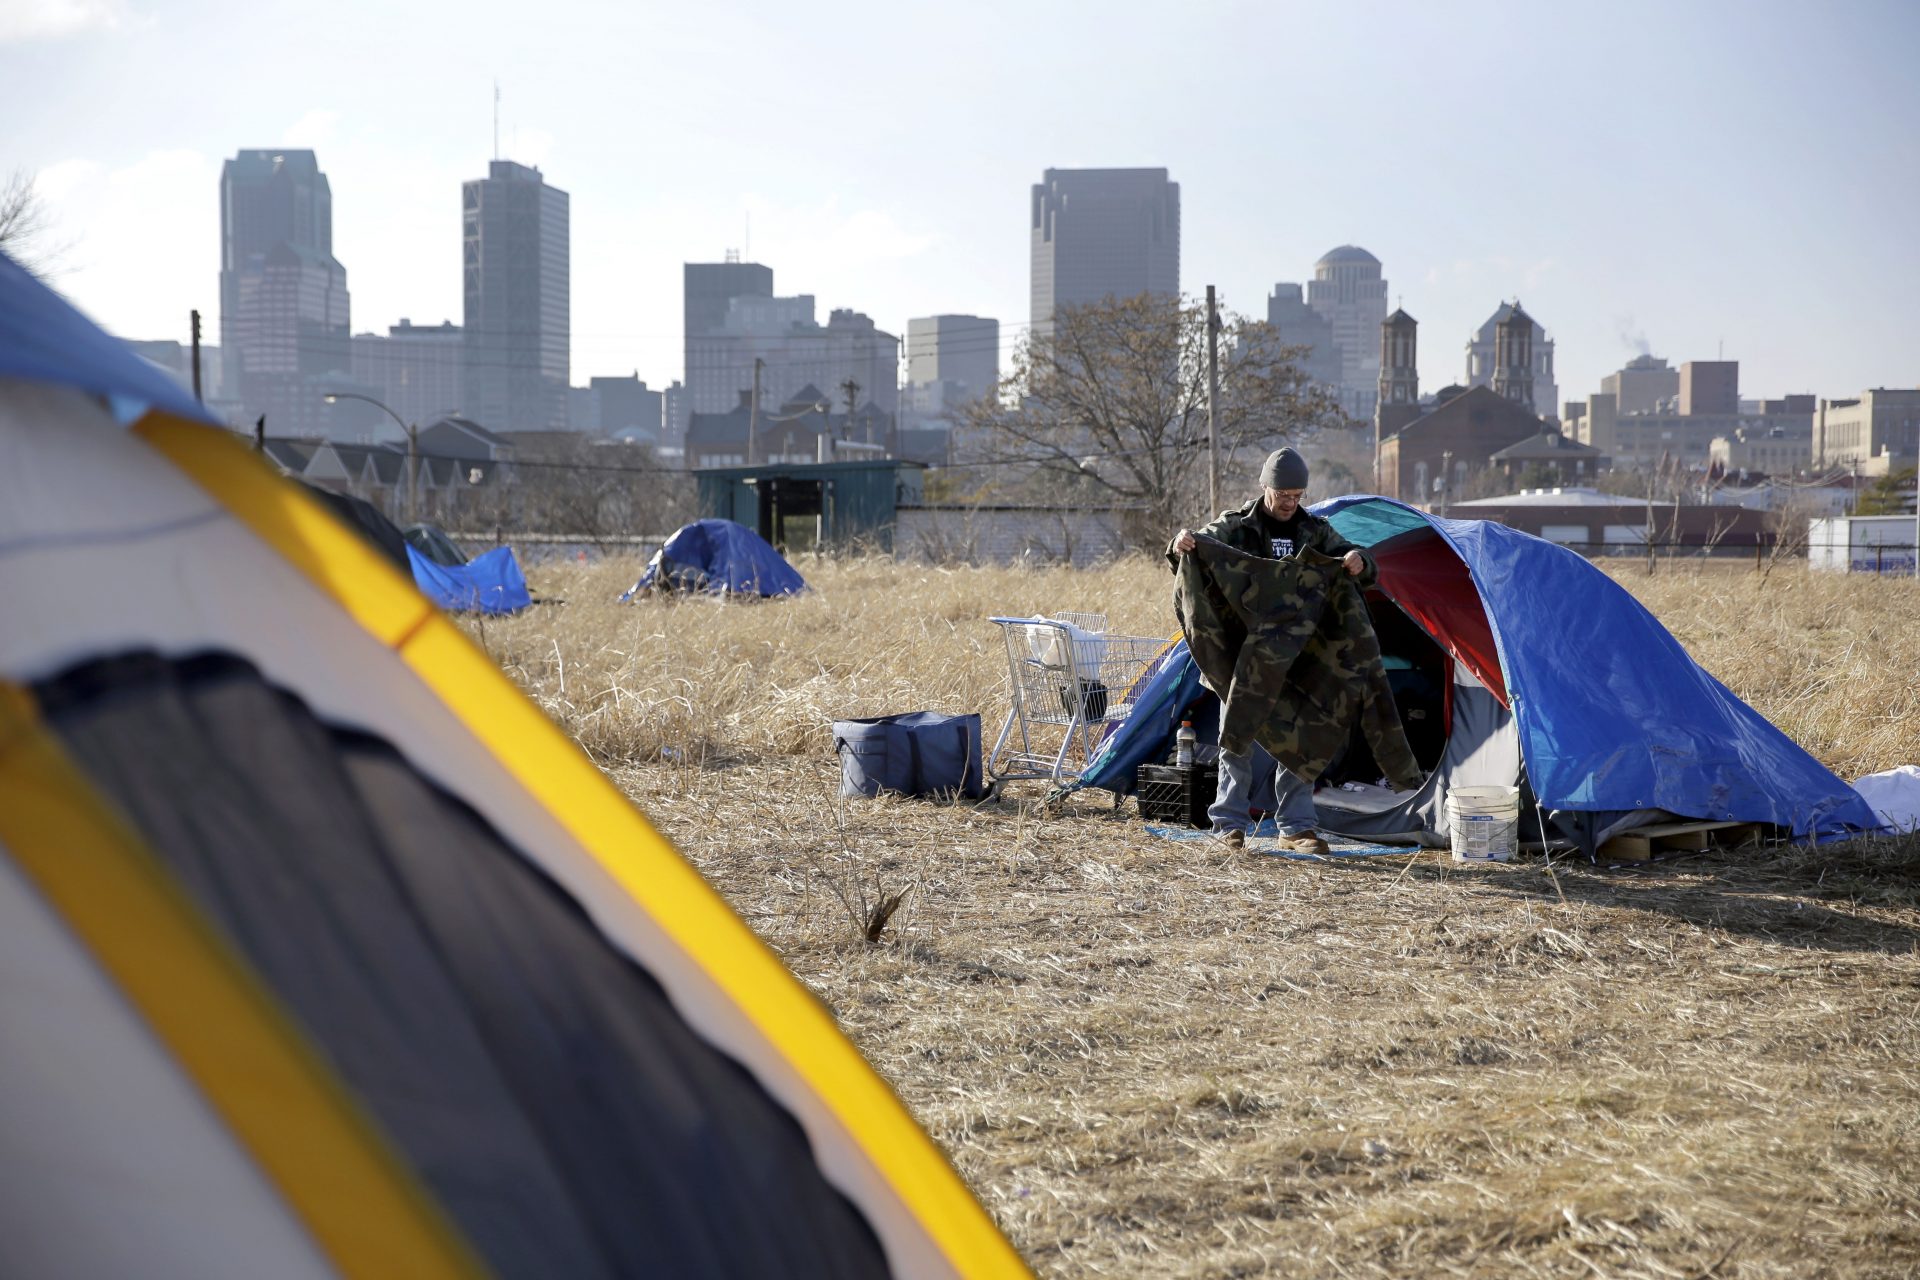 File Photo: Terry, cleans out his tent at a large homeless encampment, near downtown St. Louis. The gap between the haves and have-nots in the United States grew last year. Income inequality in the United States expanded from 2017 to 2018, with several heartland states among the leaders of the increase, even though several wealthy coastal states still had the most inequality overall, according to figures released Thursday, Sept. 26, 2019, by the U.S. Census Bureau.